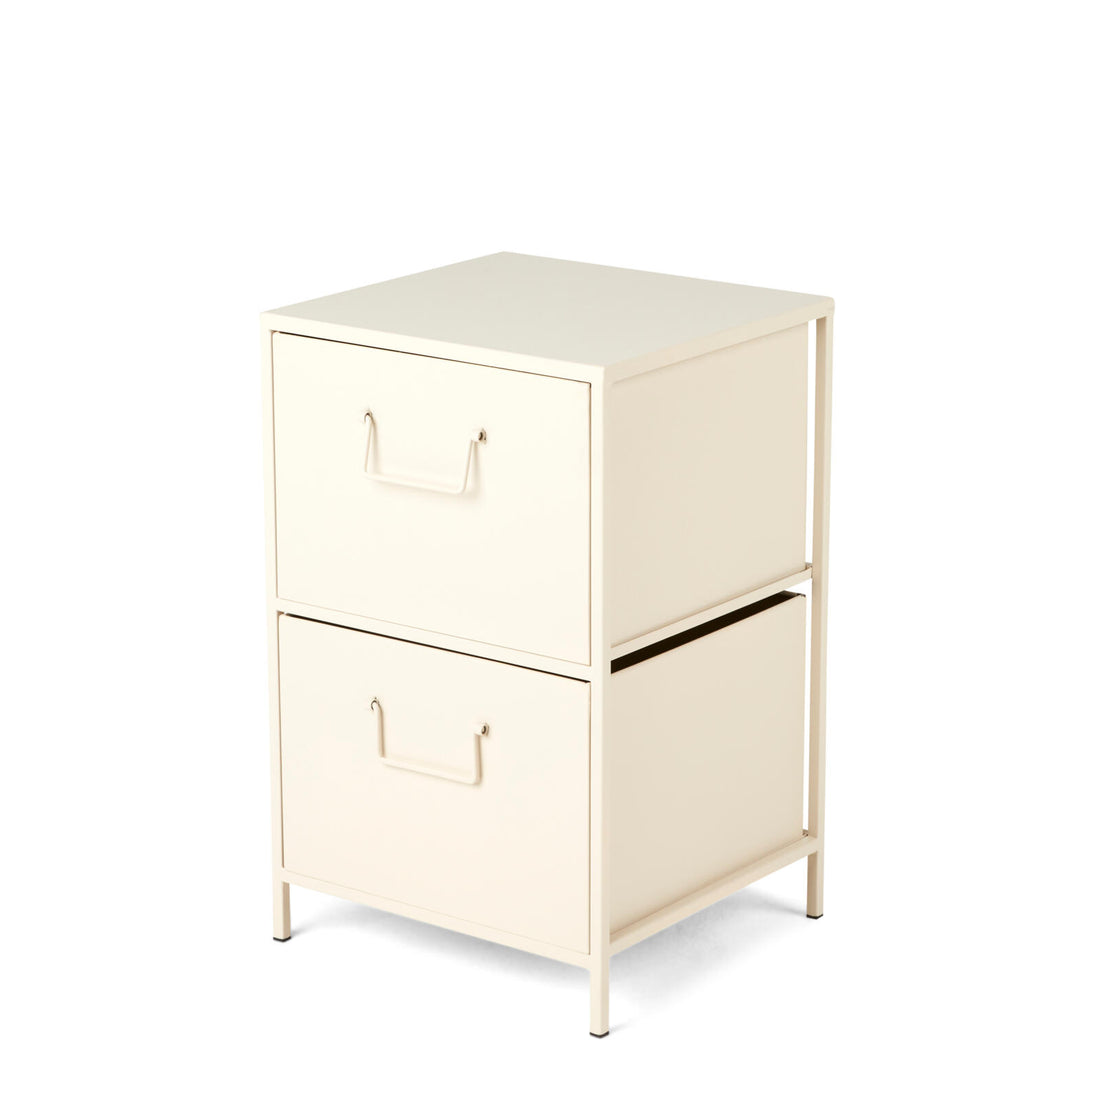 PHARMA Chest of drawers 2 drawers sand